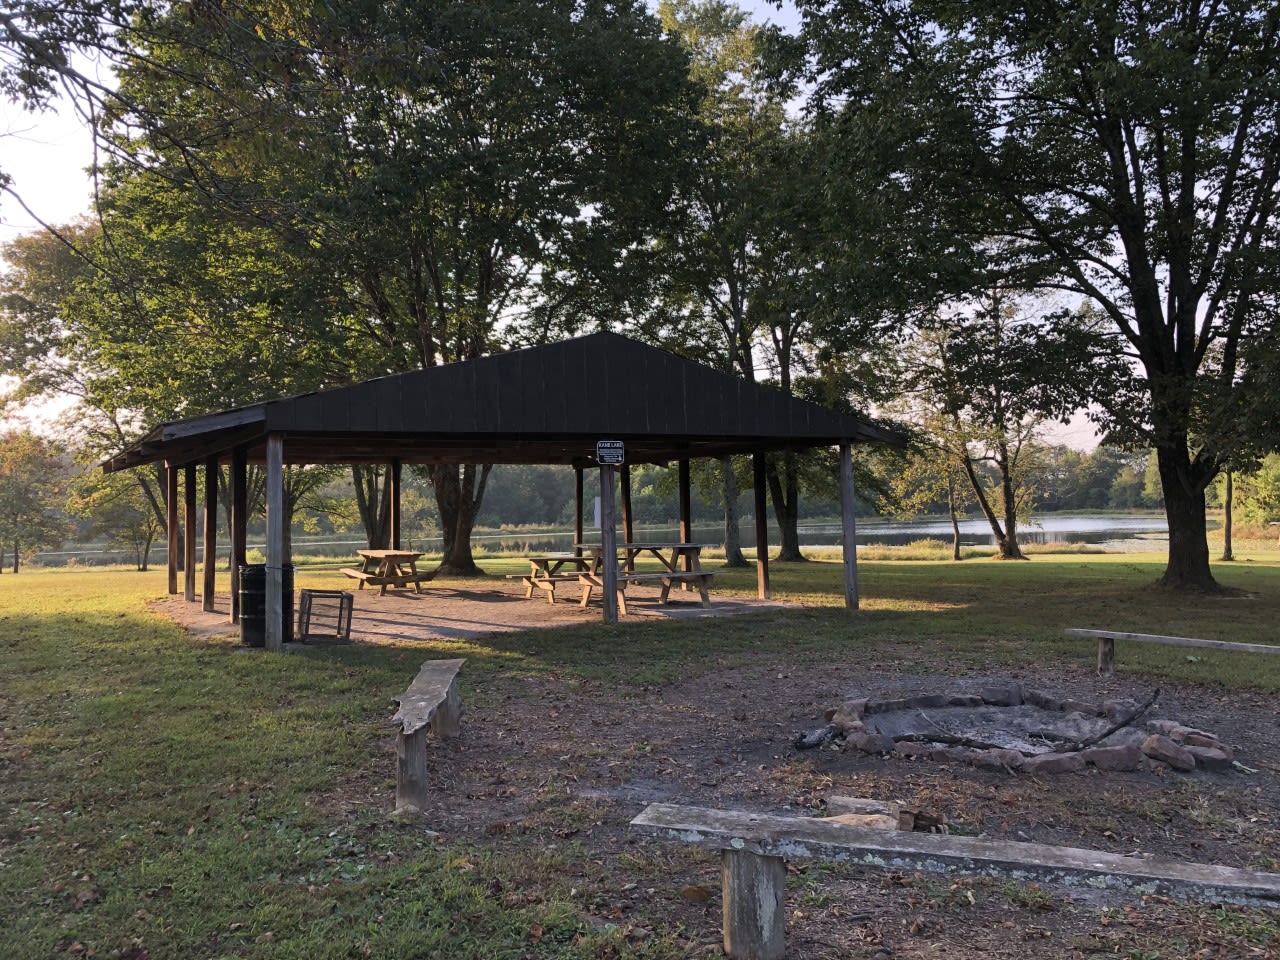 Fire pit area and Pavilion at Kane Lake.